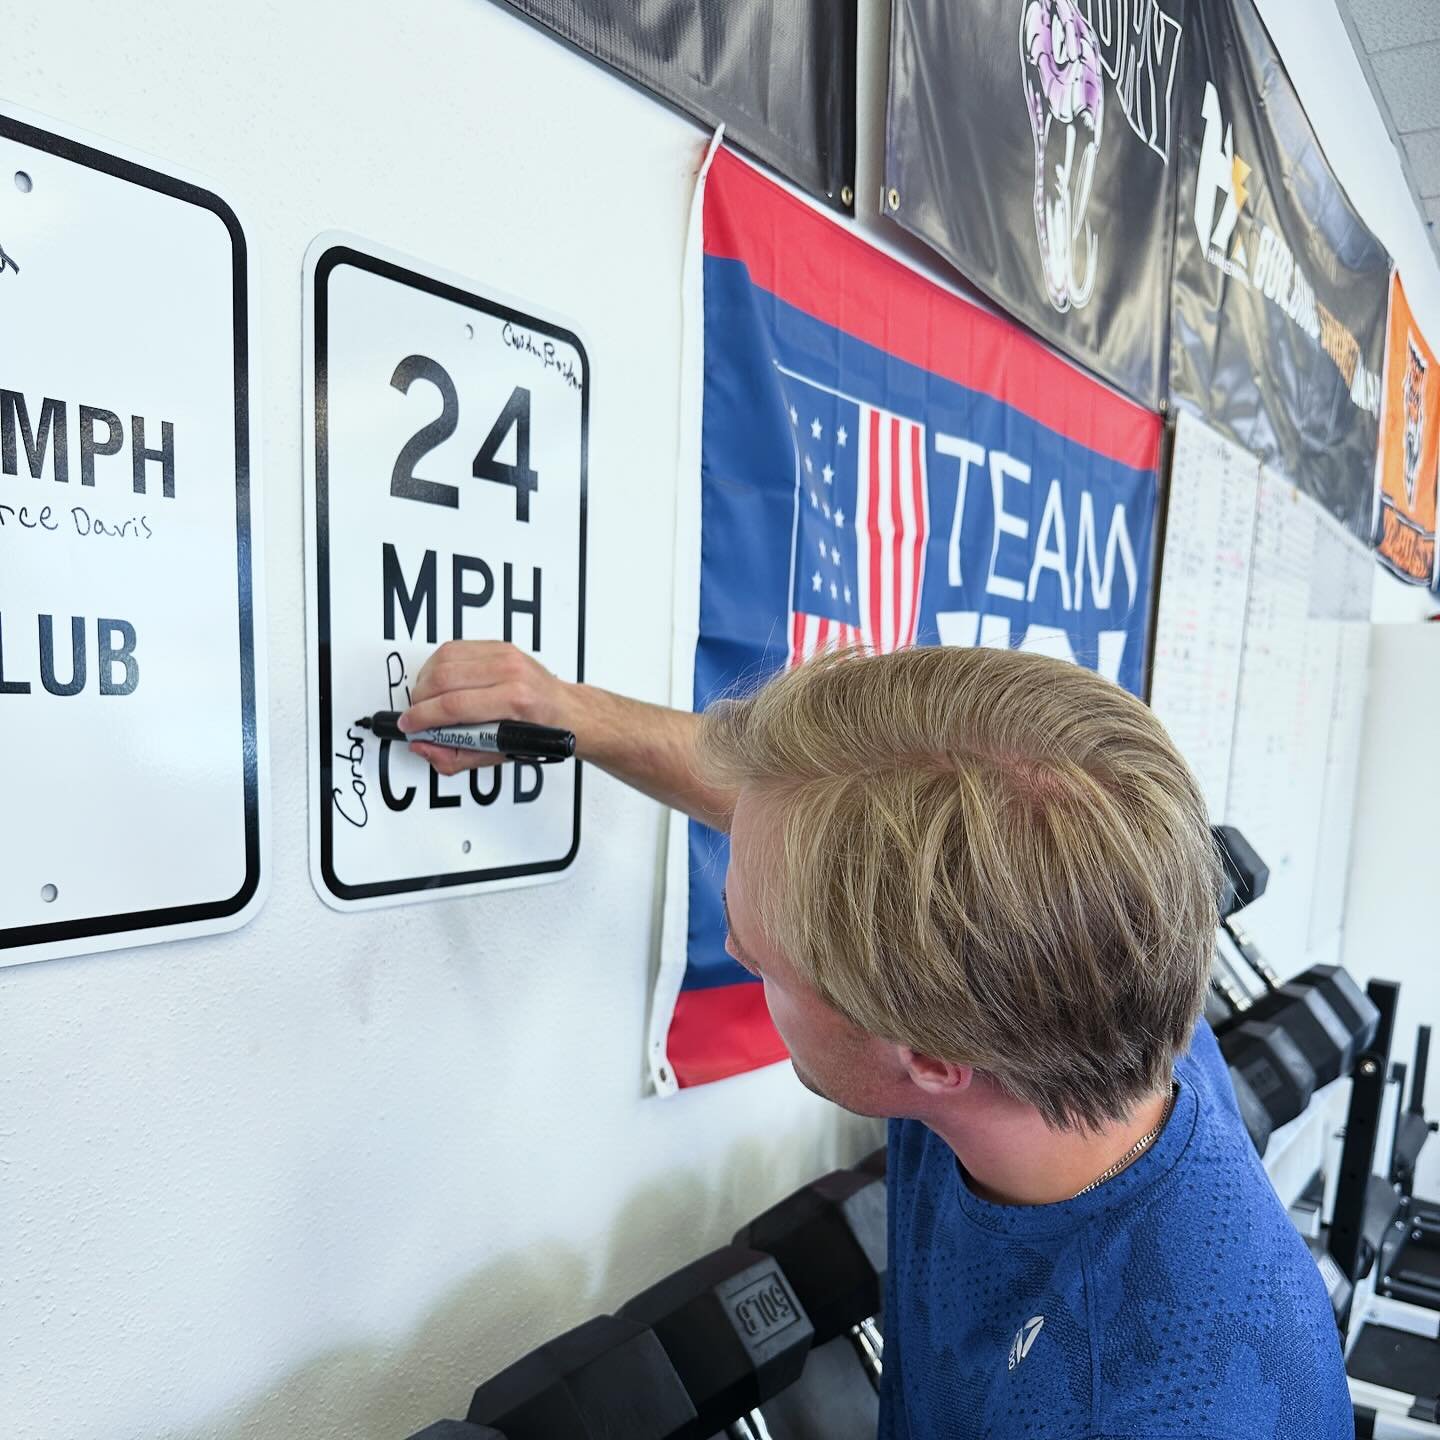 Things are getting SERIOUS around here. New 24mph board and we&rsquo;ve got 3 athletes earning their spot up there over the past month.

Big moves for our athletes and the competition in Pocatello. Keep working #Idaho 

#BuildingStrongerHumans #Speed